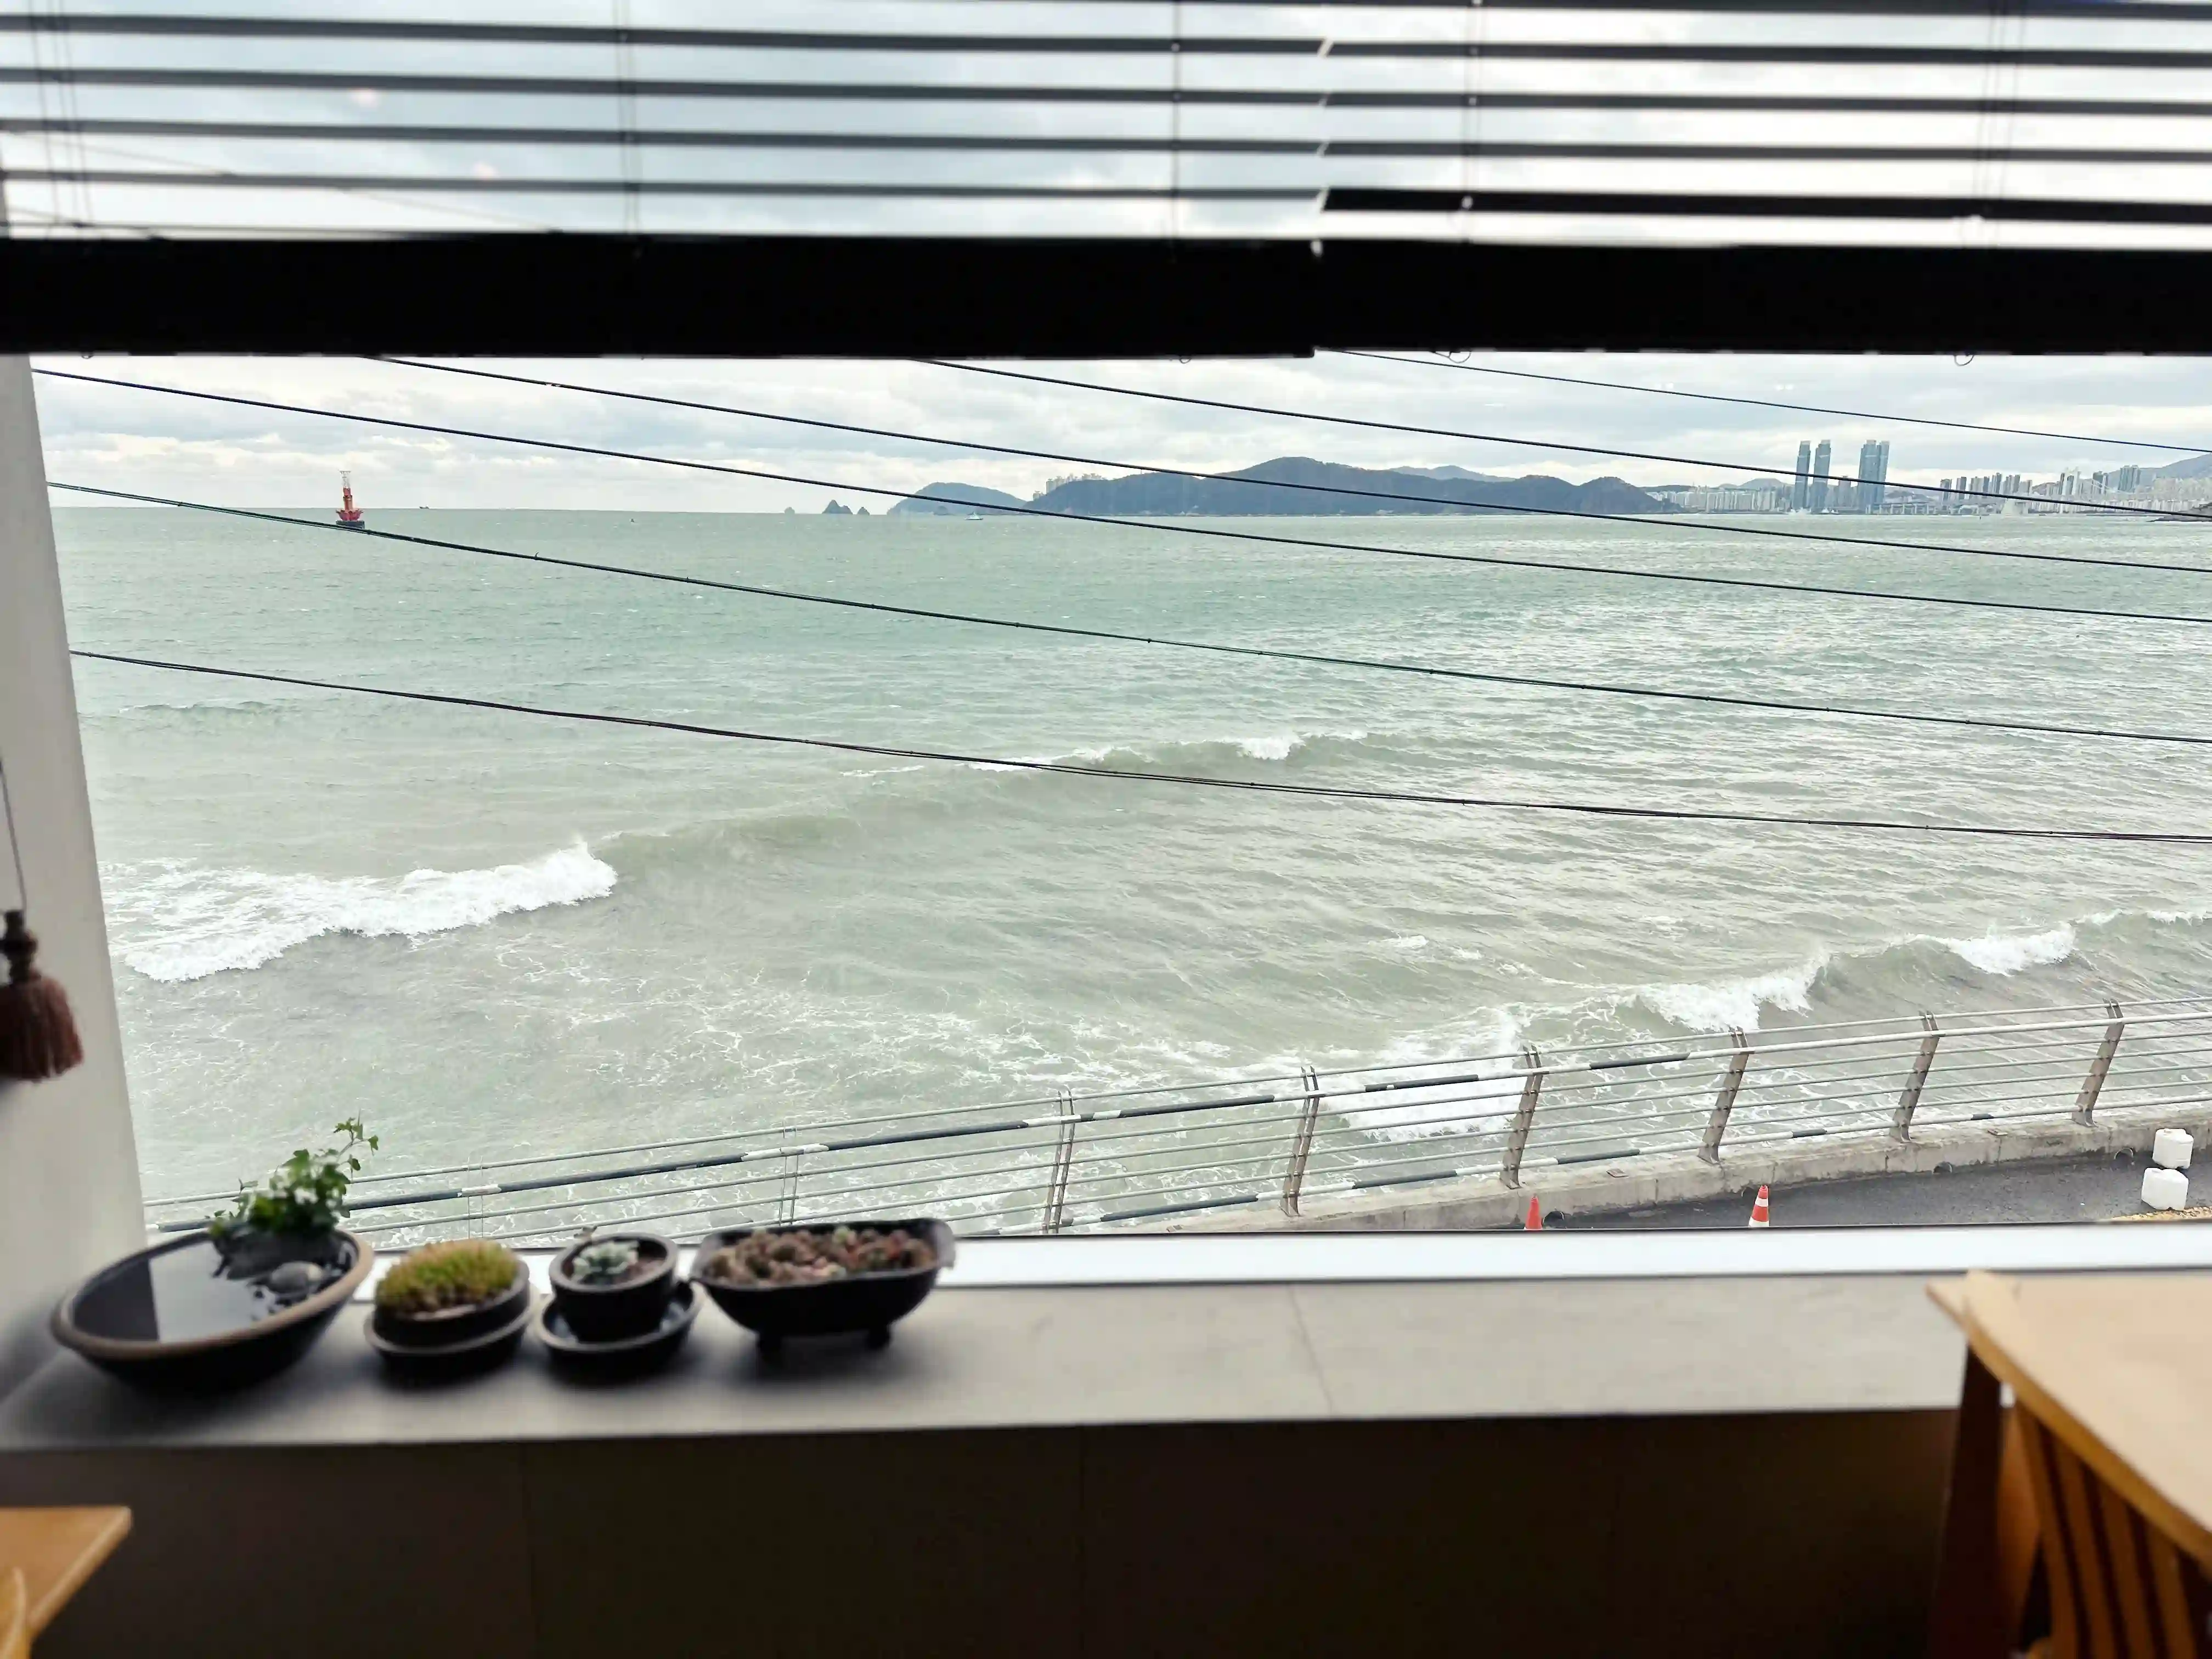 photoed by 선창, can see sea while eating